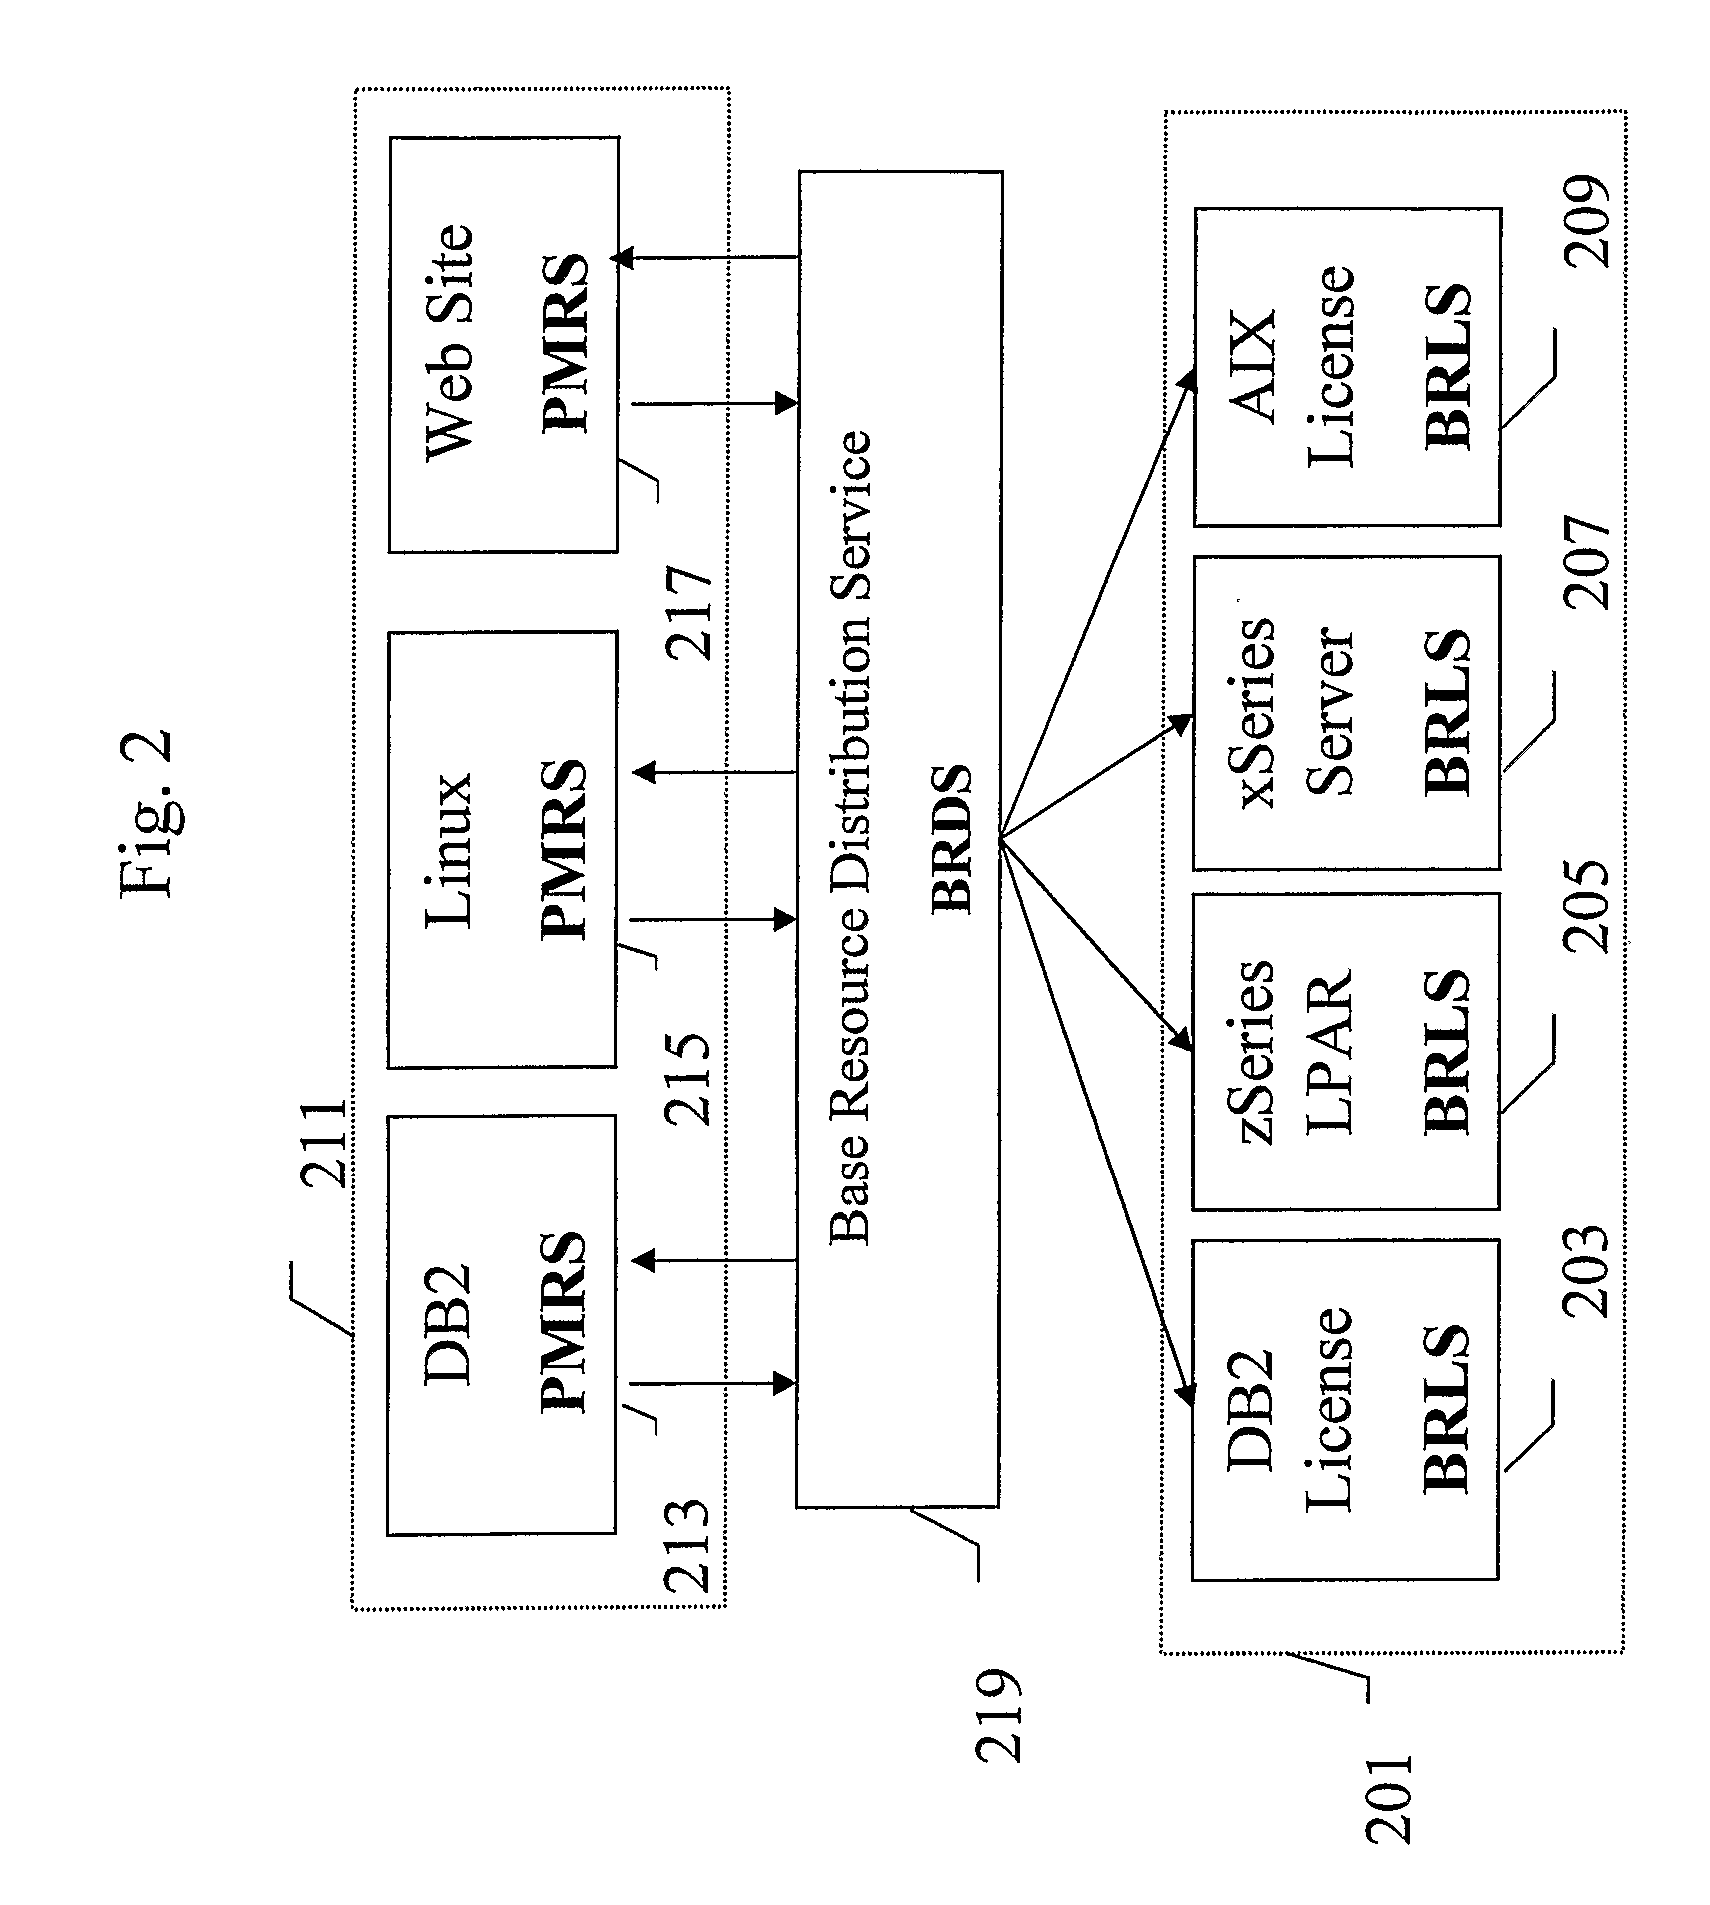 Componentized Automatic Provisioning And Management Of Computing Environments For Computing Utilities